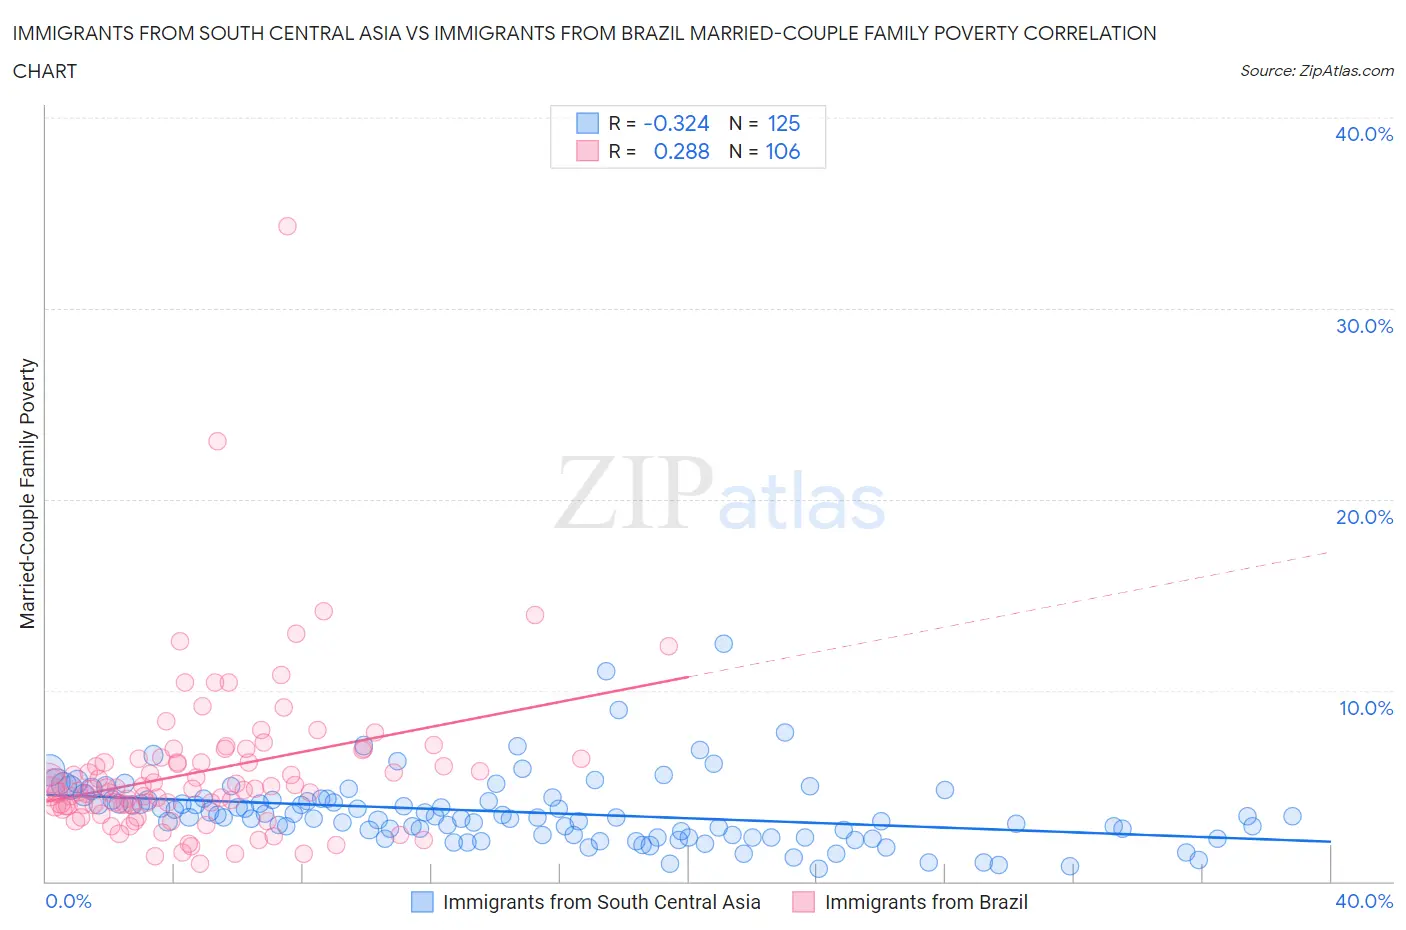 Immigrants from South Central Asia vs Immigrants from Brazil Married-Couple Family Poverty